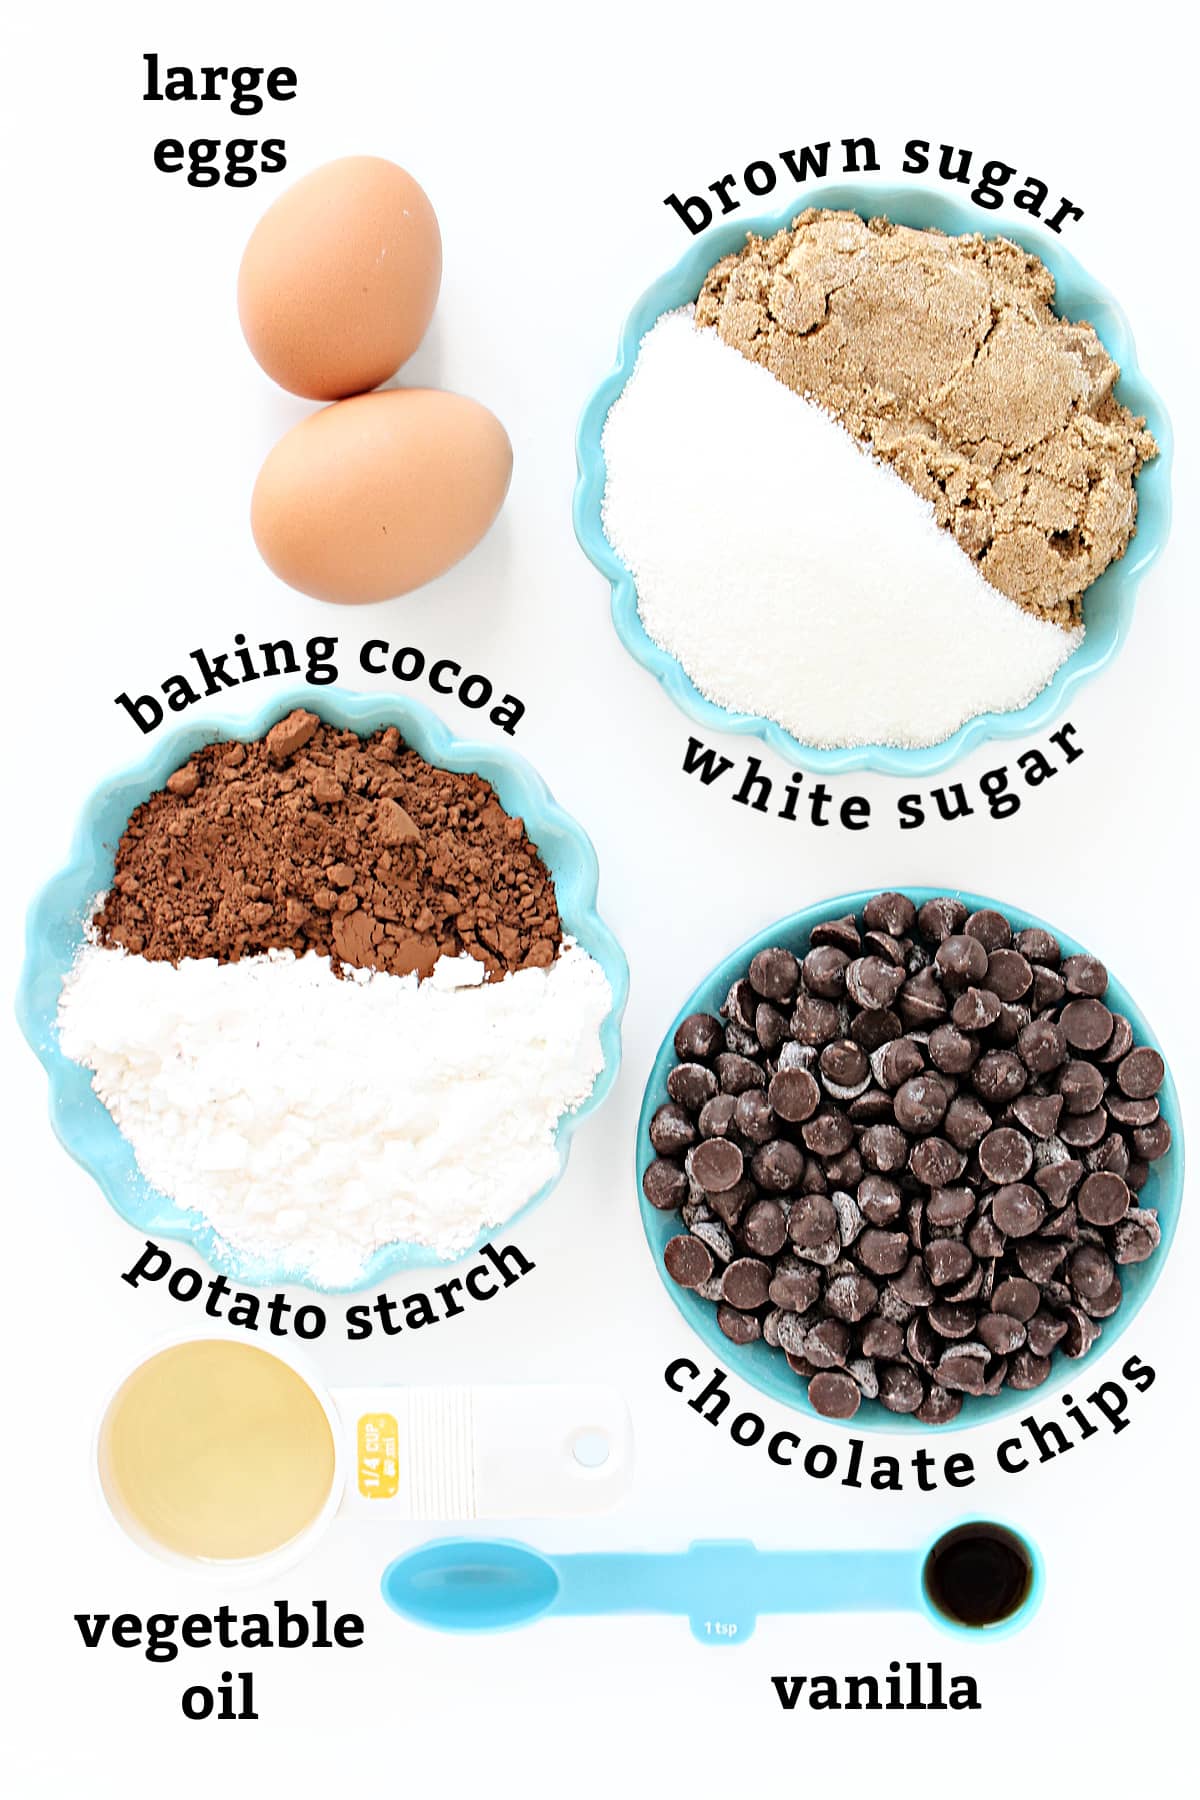 Ingredients labeled eggs, brown sugar, white sugar, cocoa, potato starch, chocolate chips, vegetable oil, vanilla.